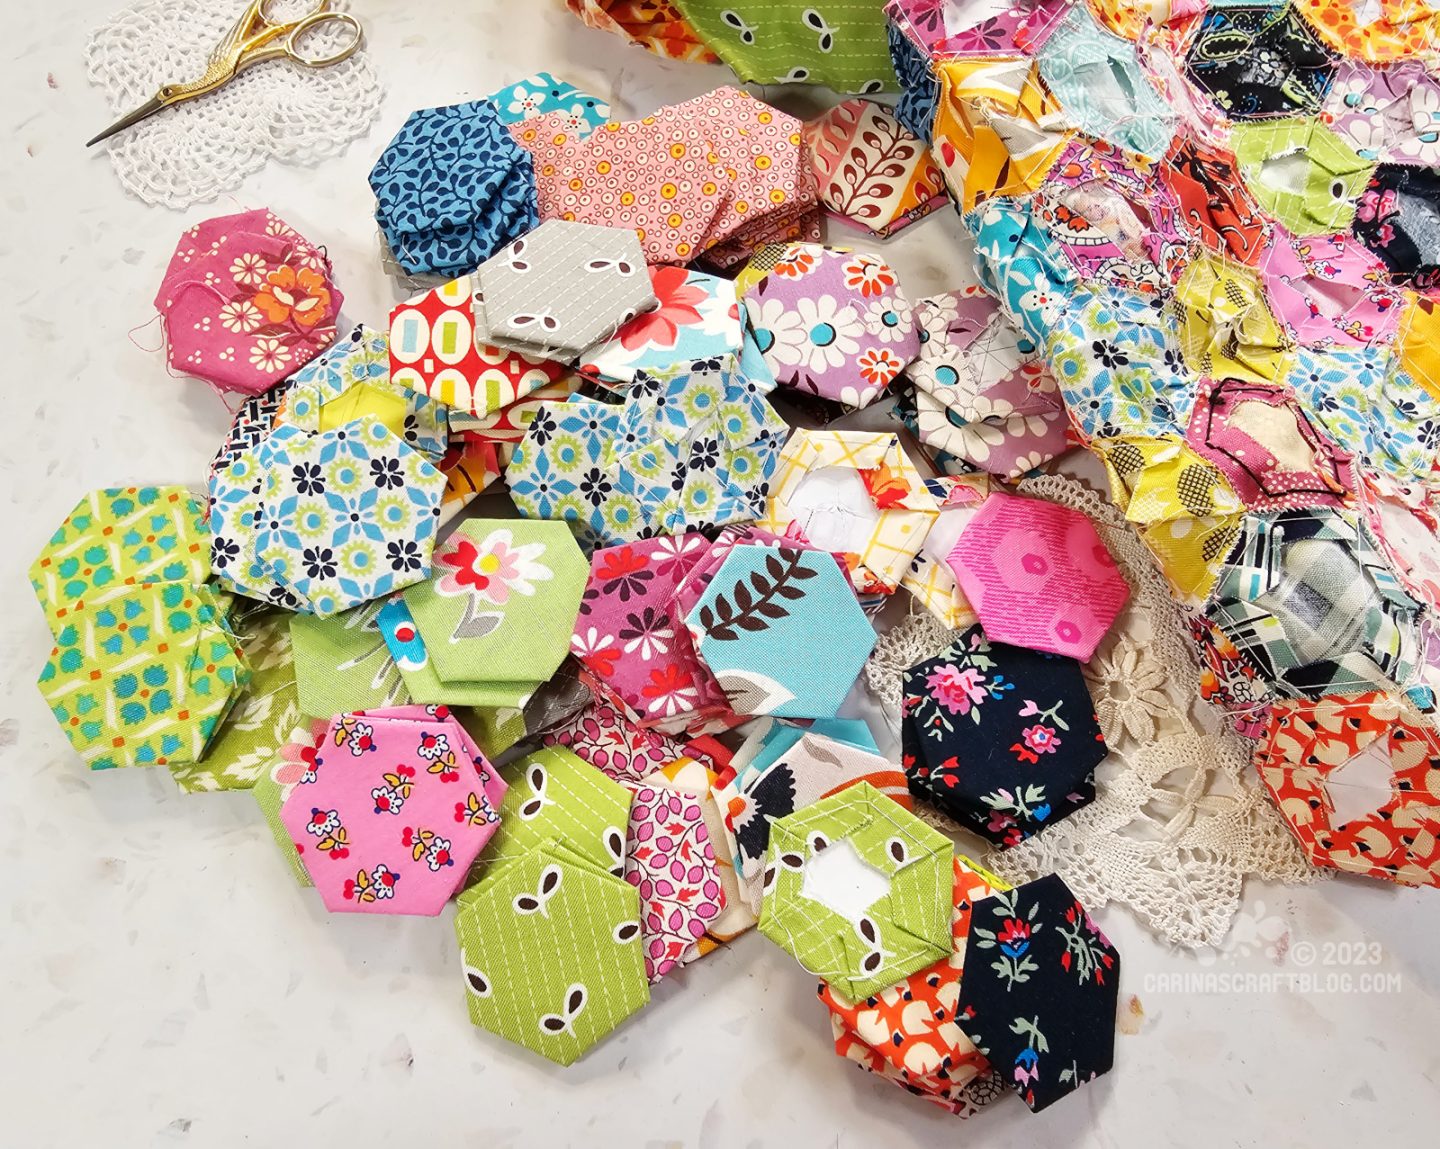 Overhead view of a scattered pile of fabric hexagons.